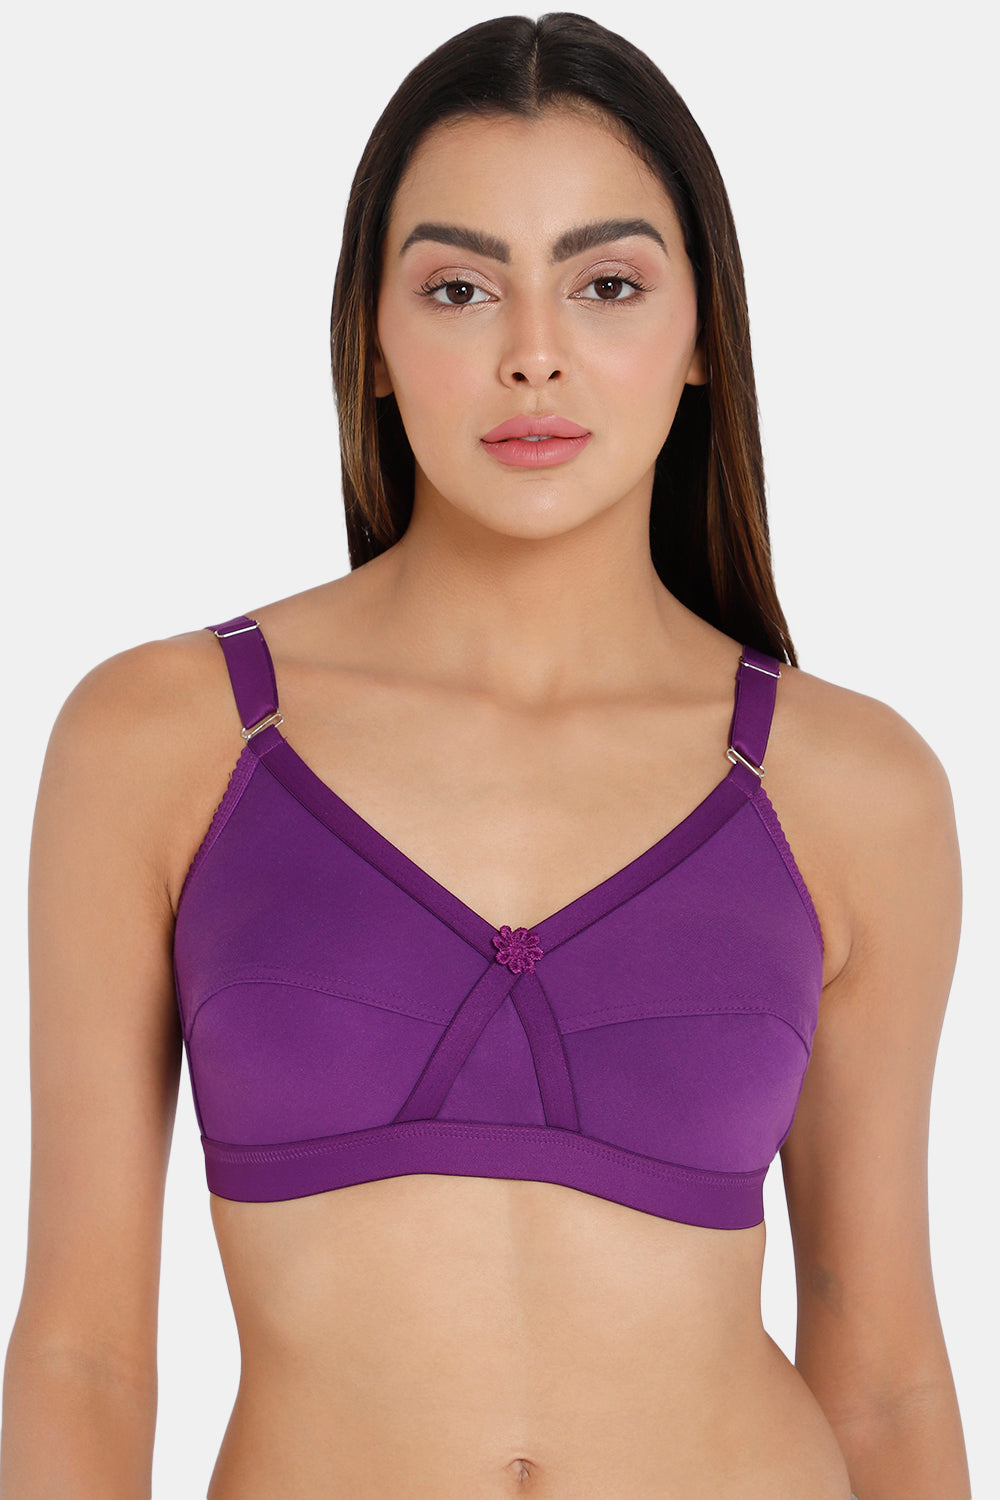 BraWorld - Model is wearing a 36FF. Bras that fit properly and